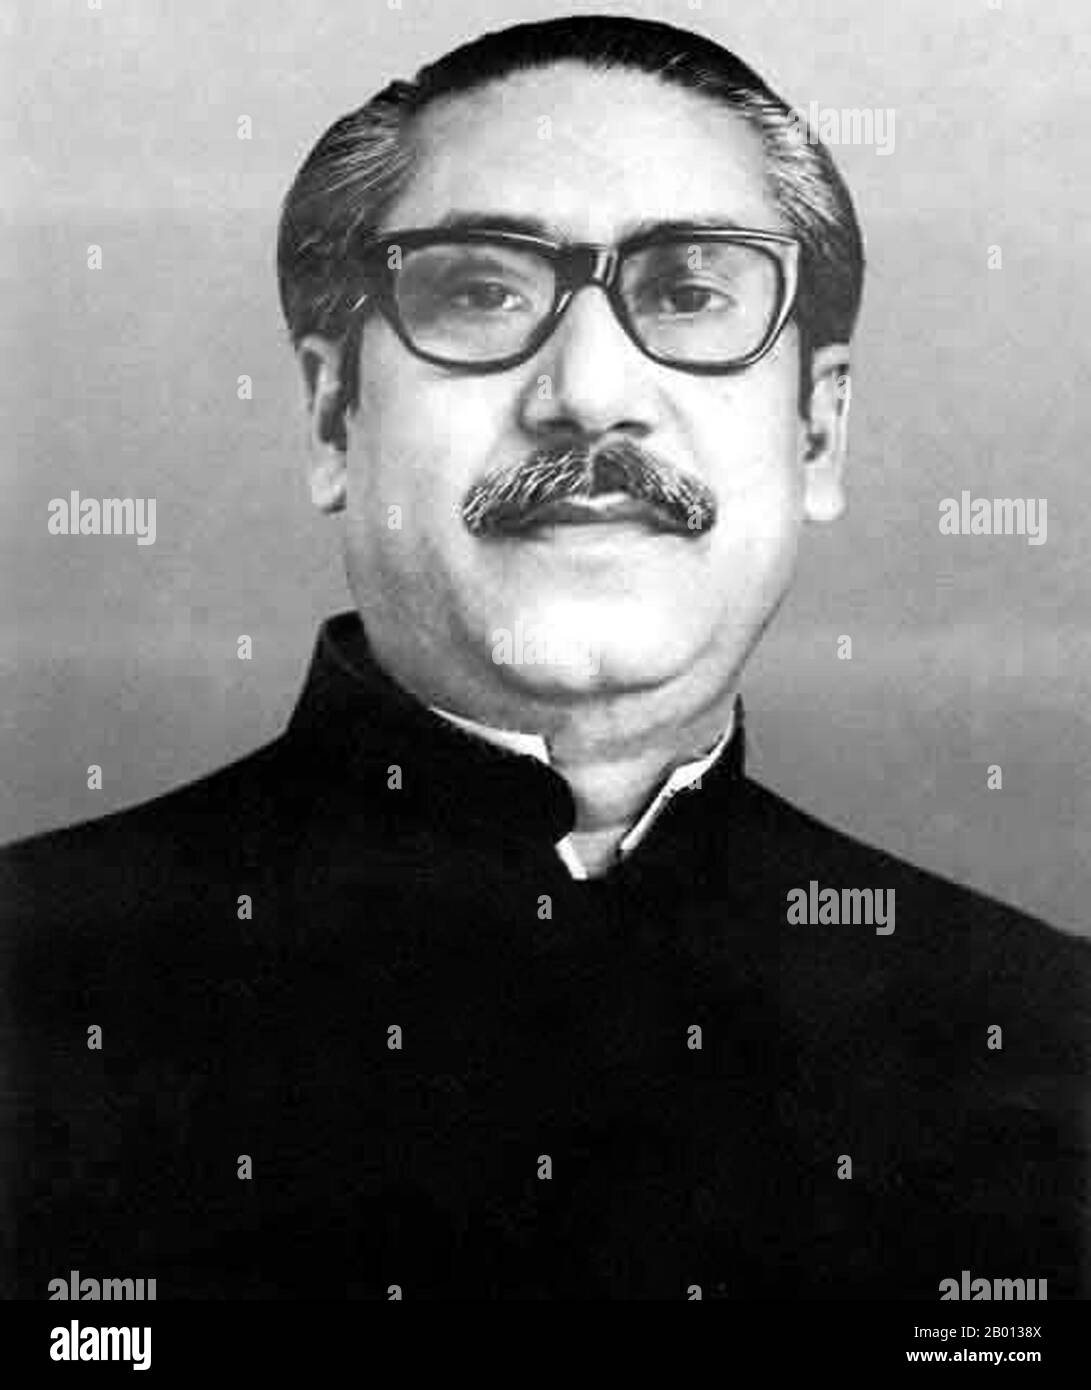 Bangladesh: Sheikh Mujibur Rahman (March 17, 1920 – August 15, 1975), first President of Bangladesh (r. 1971-72, 1975), 1950s.  Sheikh Mujibur Rahman was a Bengali politician and the founding leader of the People's Republic of Bangladesh, generally considered in the country as the father of the Bangladeshi nation. After talks broke down with President Yahya Khan and West Pakistani politician Zulfikar Ali Bhutto, Sheikh Mujib on 26 March 1971 announced the declaration of independence of East Pakistan and announced the establishment of the sovereign People's Republic of Bangladesh. Stock Photo